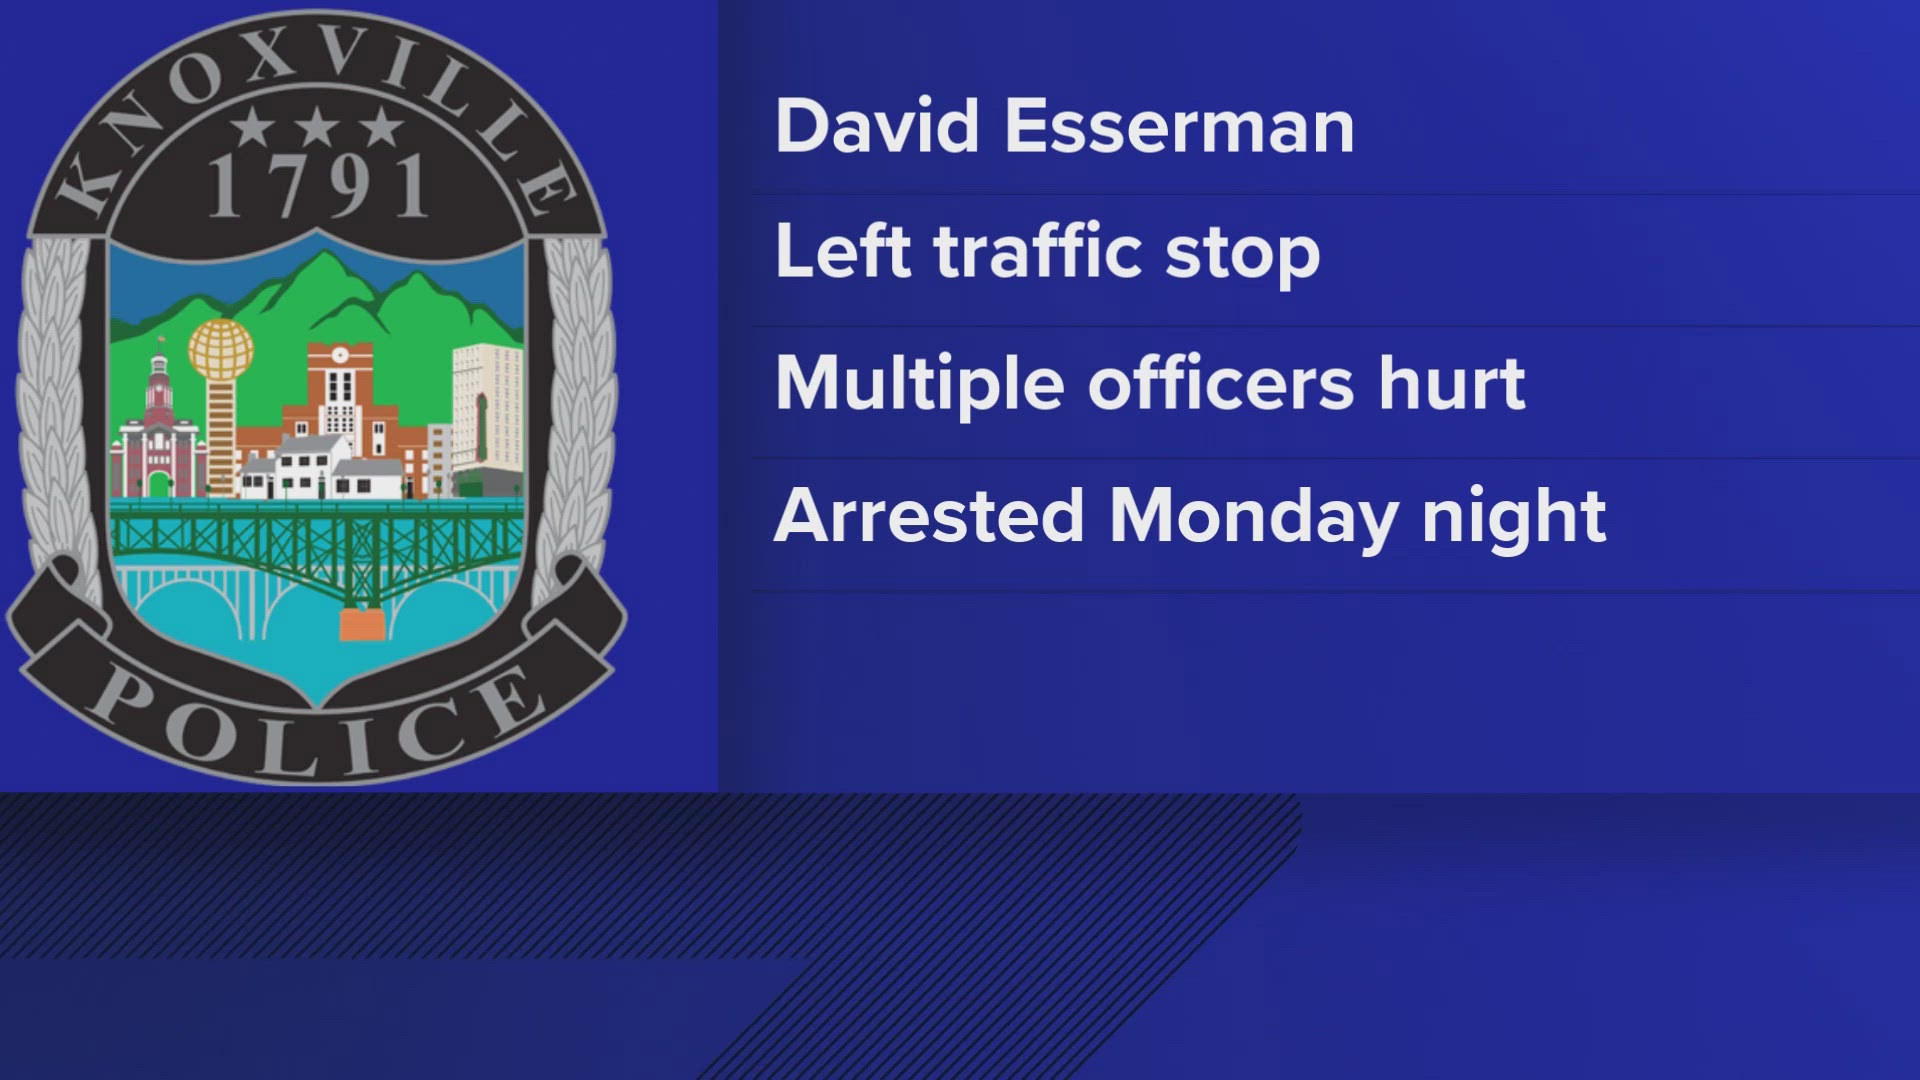 The Knoxville Police Department said David Esserman was arrested and a search of his car revealed around 350 grams of marijuana and around $40,000.